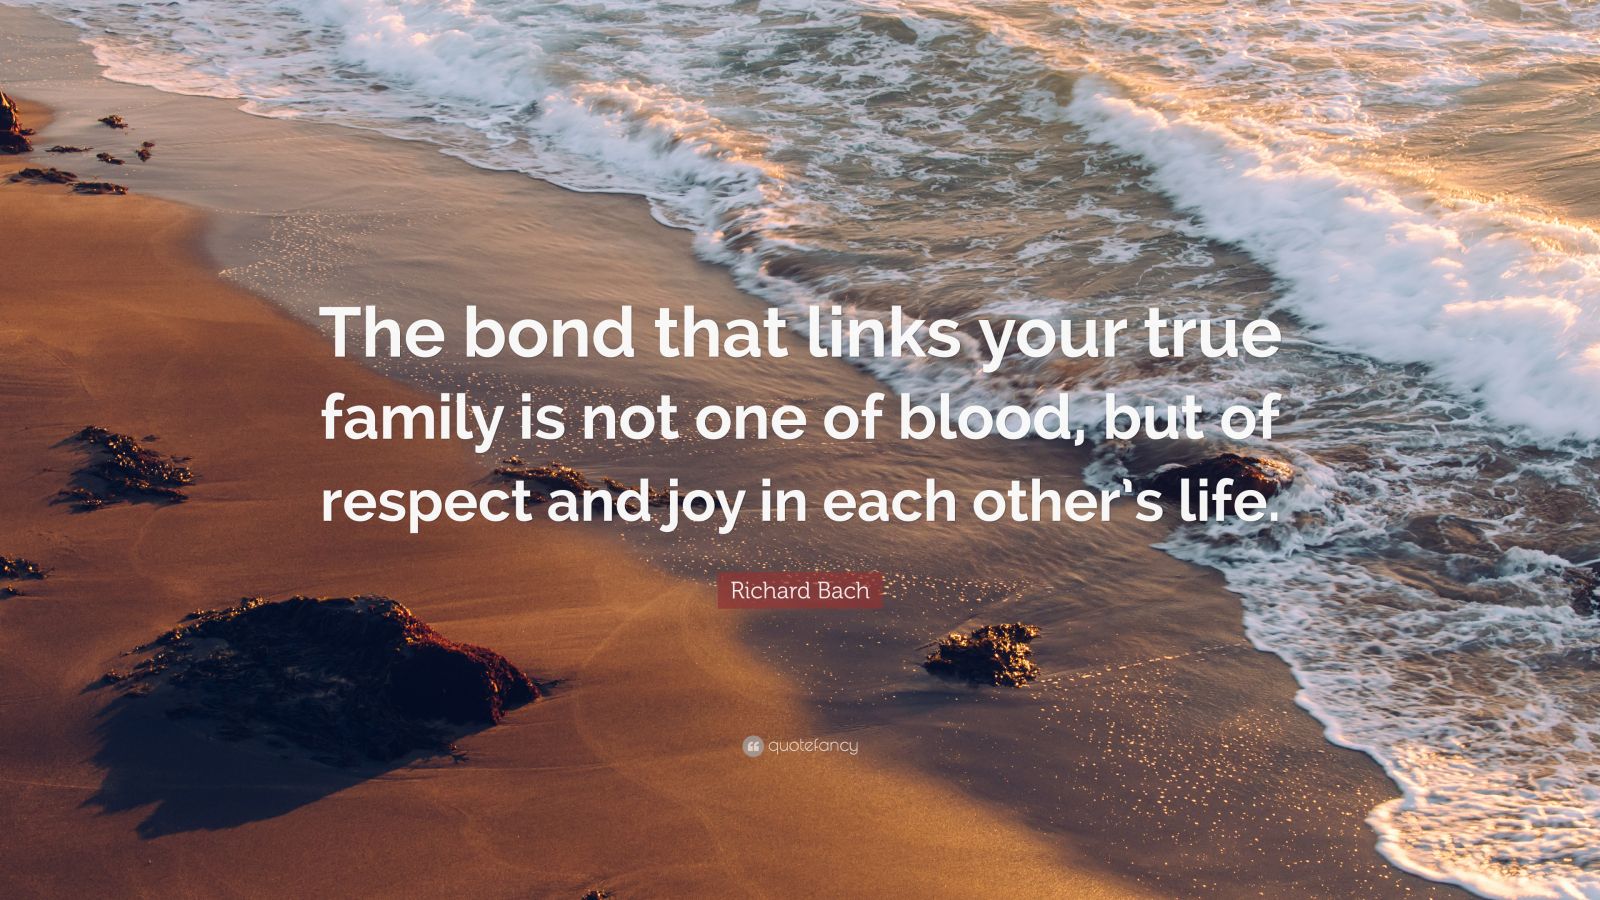 Richard Bach Quote: “The bond that links your true family is not one of